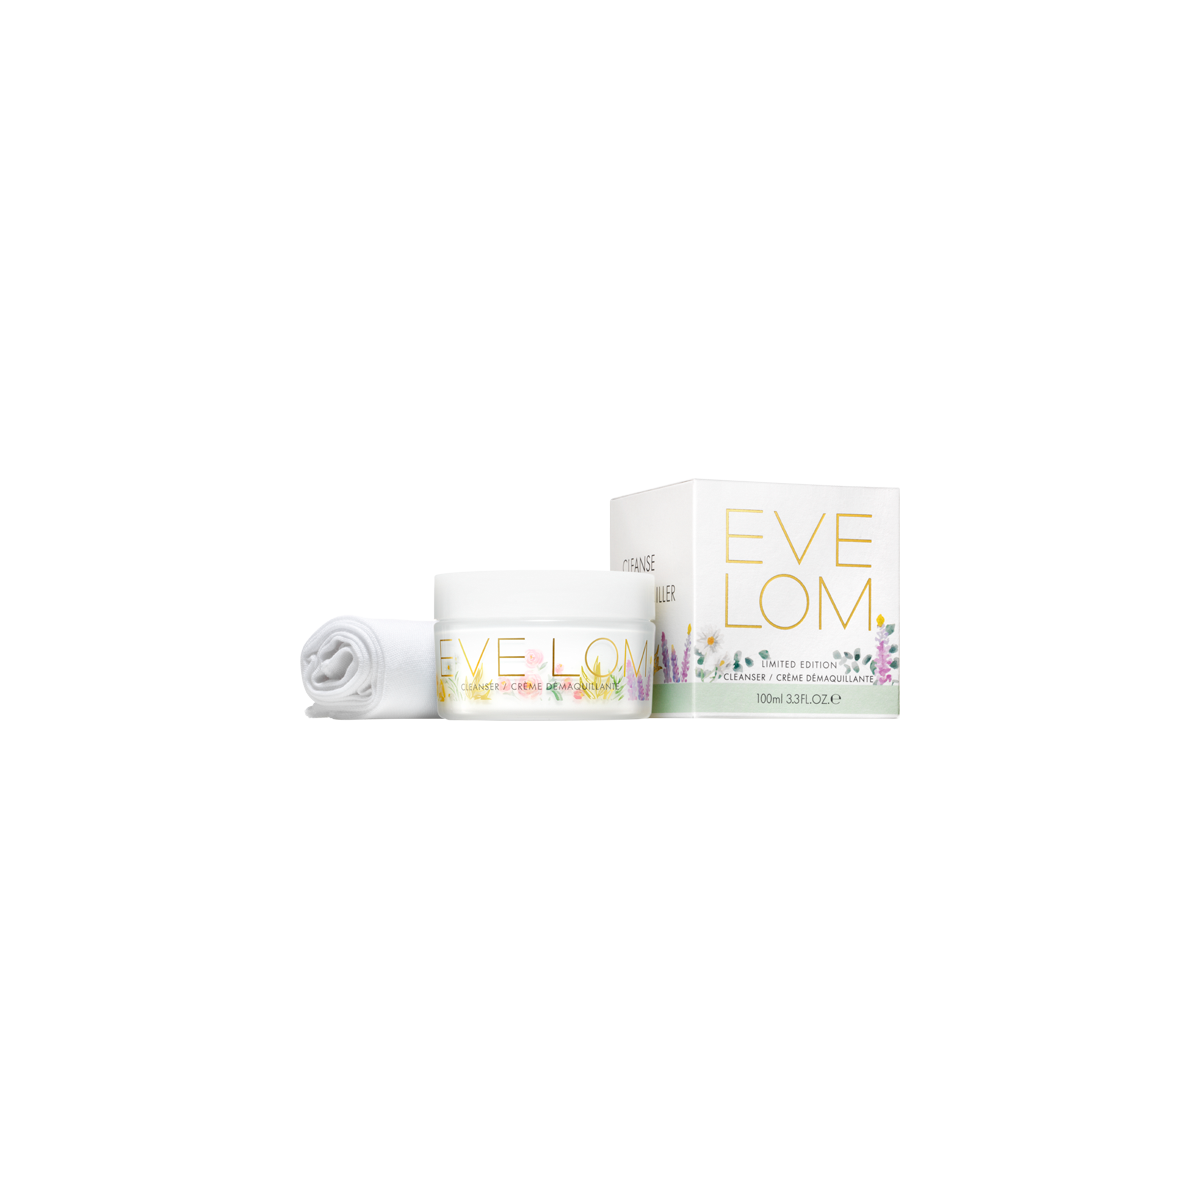 Eve Lom - Cleanser Limited Edition